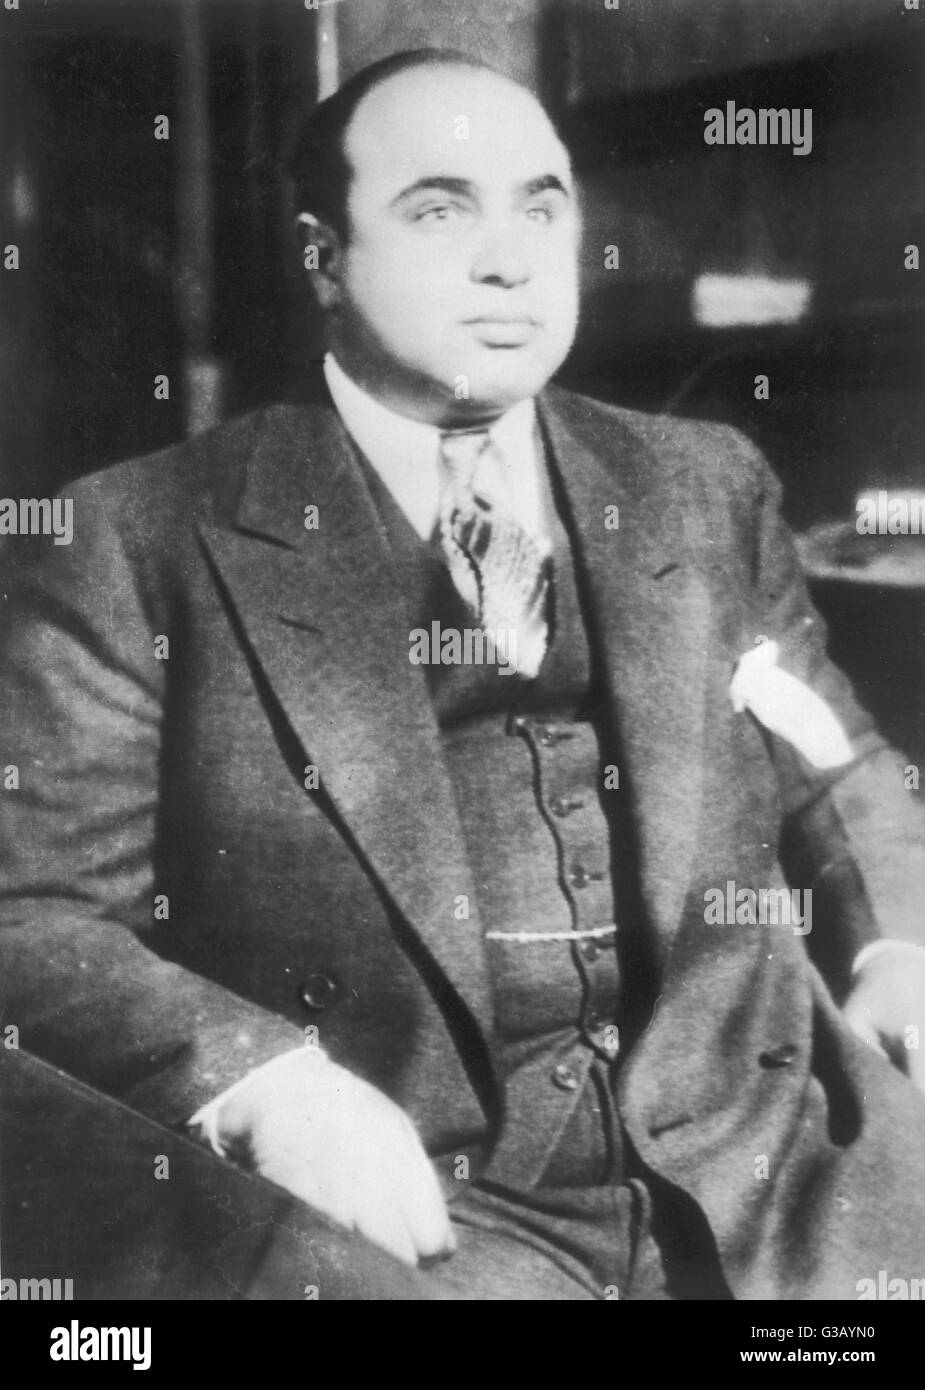 Alphonse 'Scarface" Capone, Chicago gangster data: 1931 Foto Stock